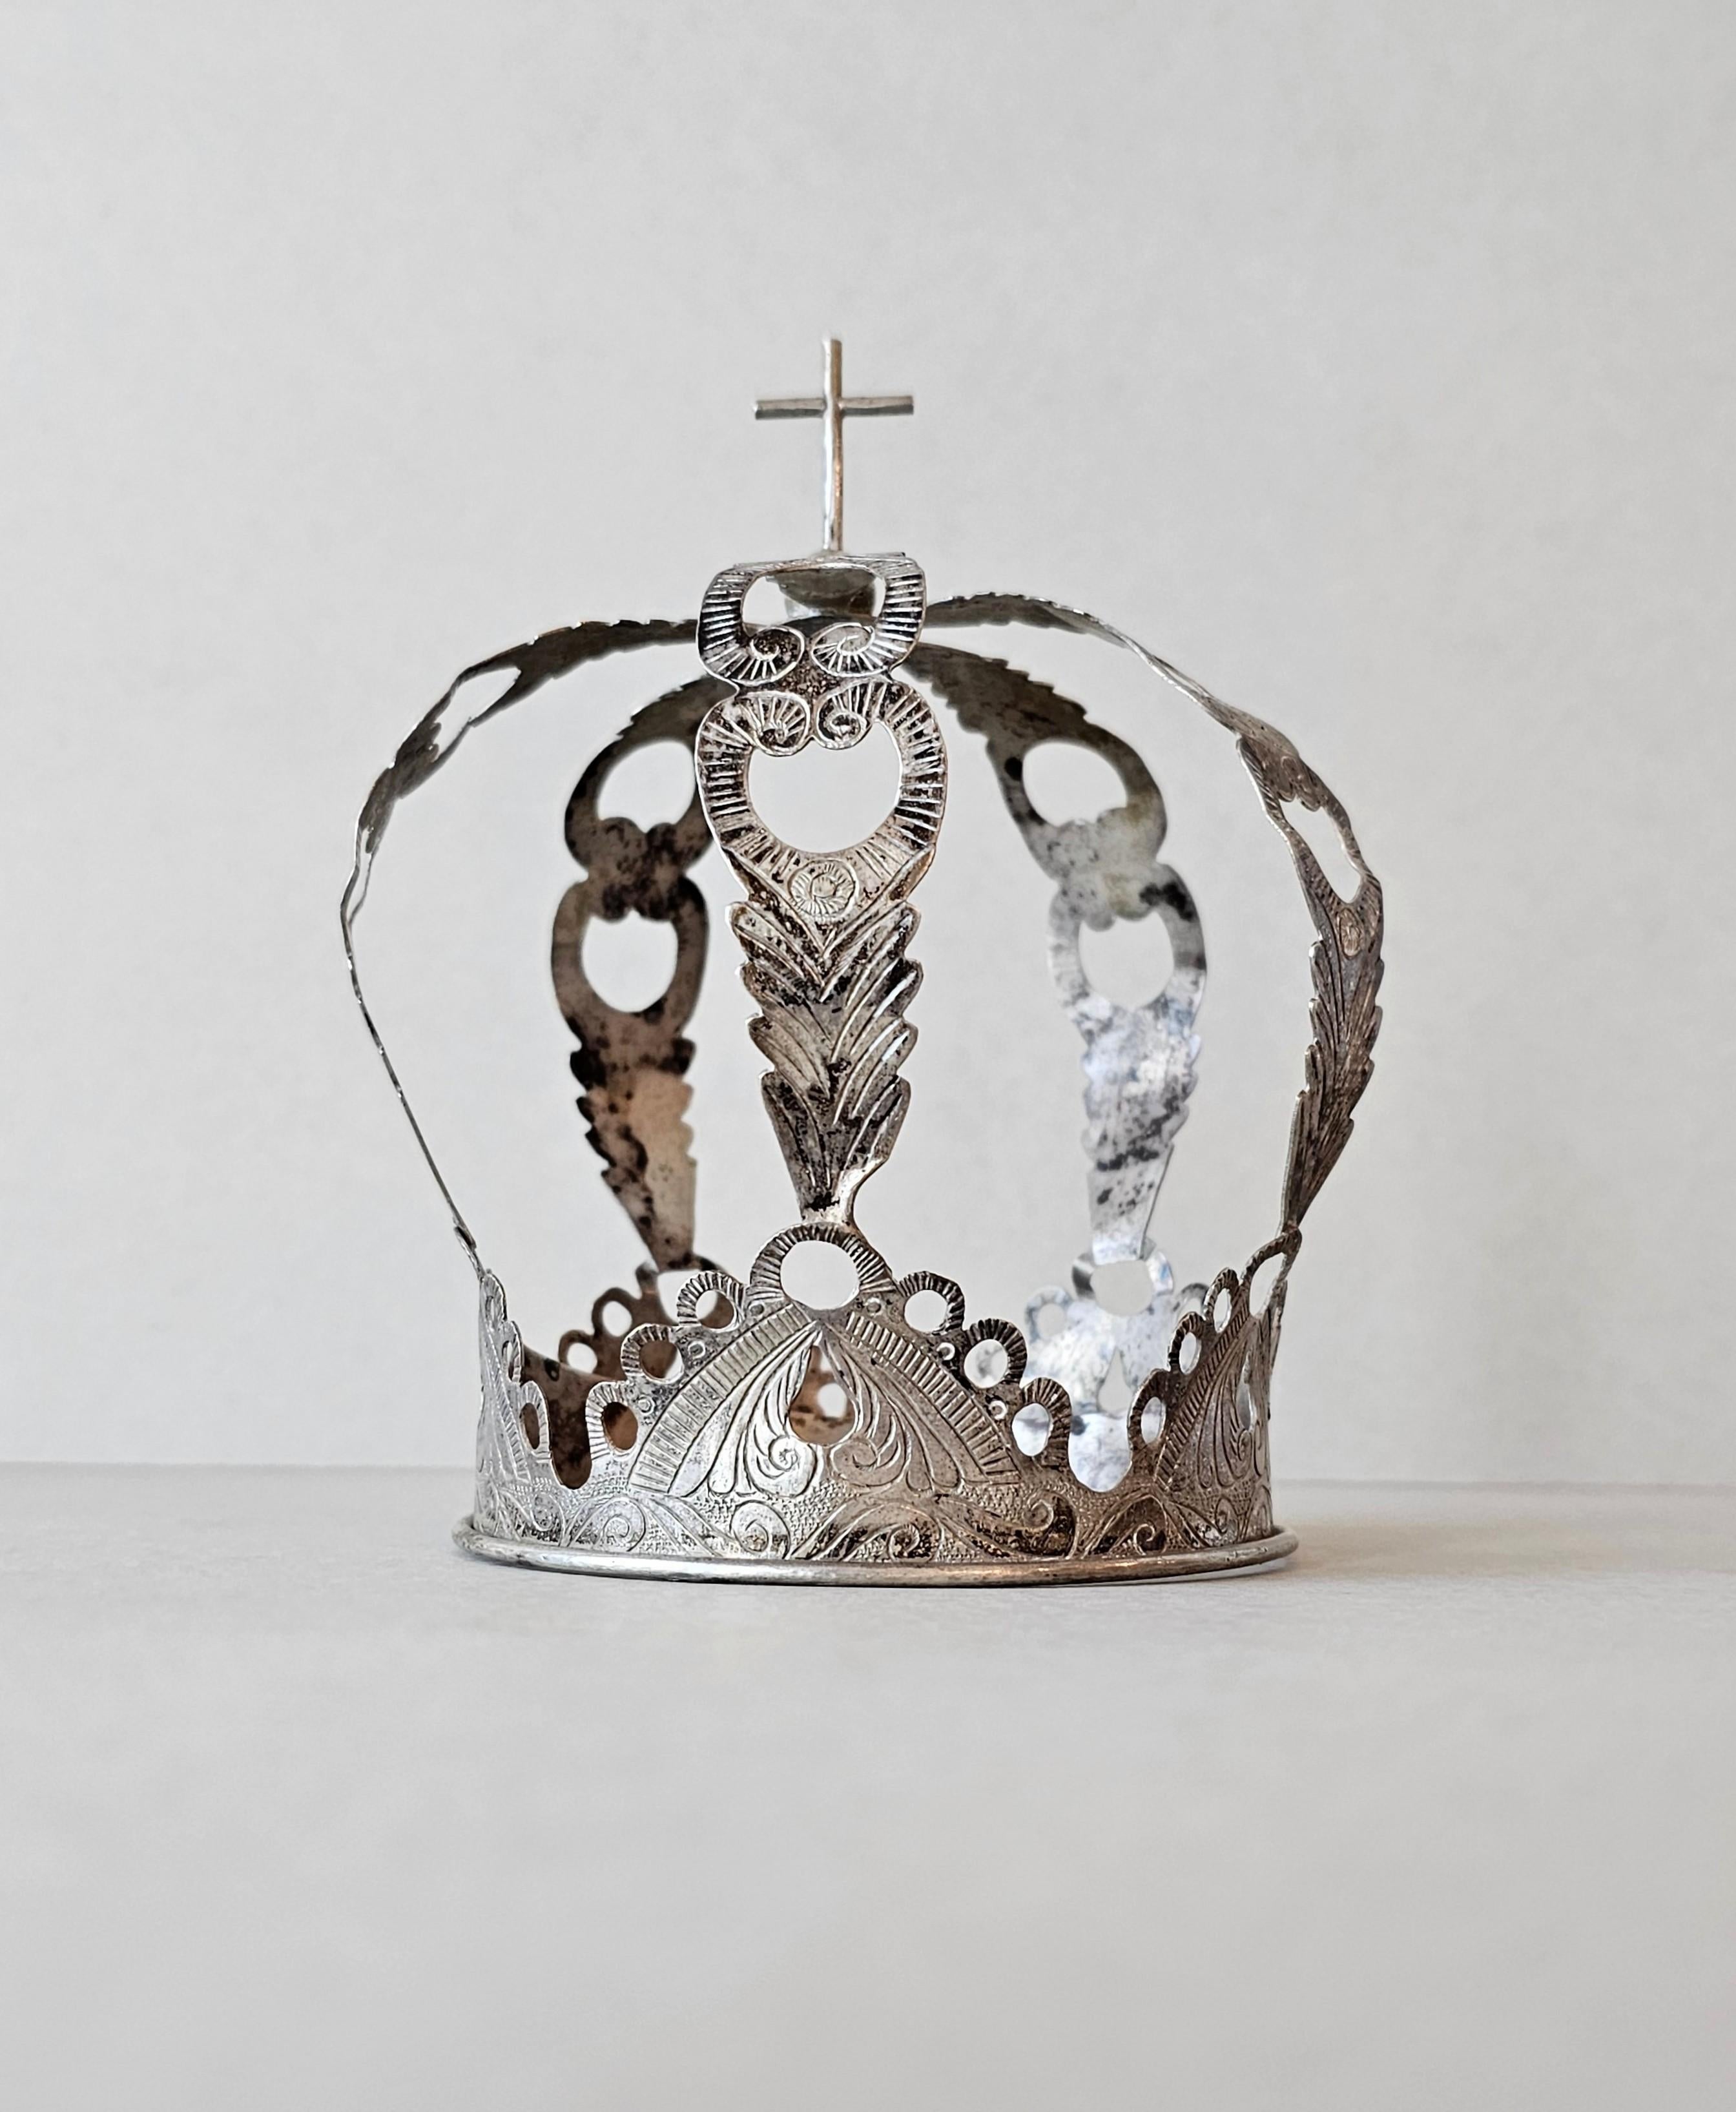 A scarce 19th century Spanish Colonial style silver saint's crown, to be mounted on the head of a church altar figure, having a cross finial, pierced arches with foliate motif and finely engraved ornamentation. 

A superb museum quality example,